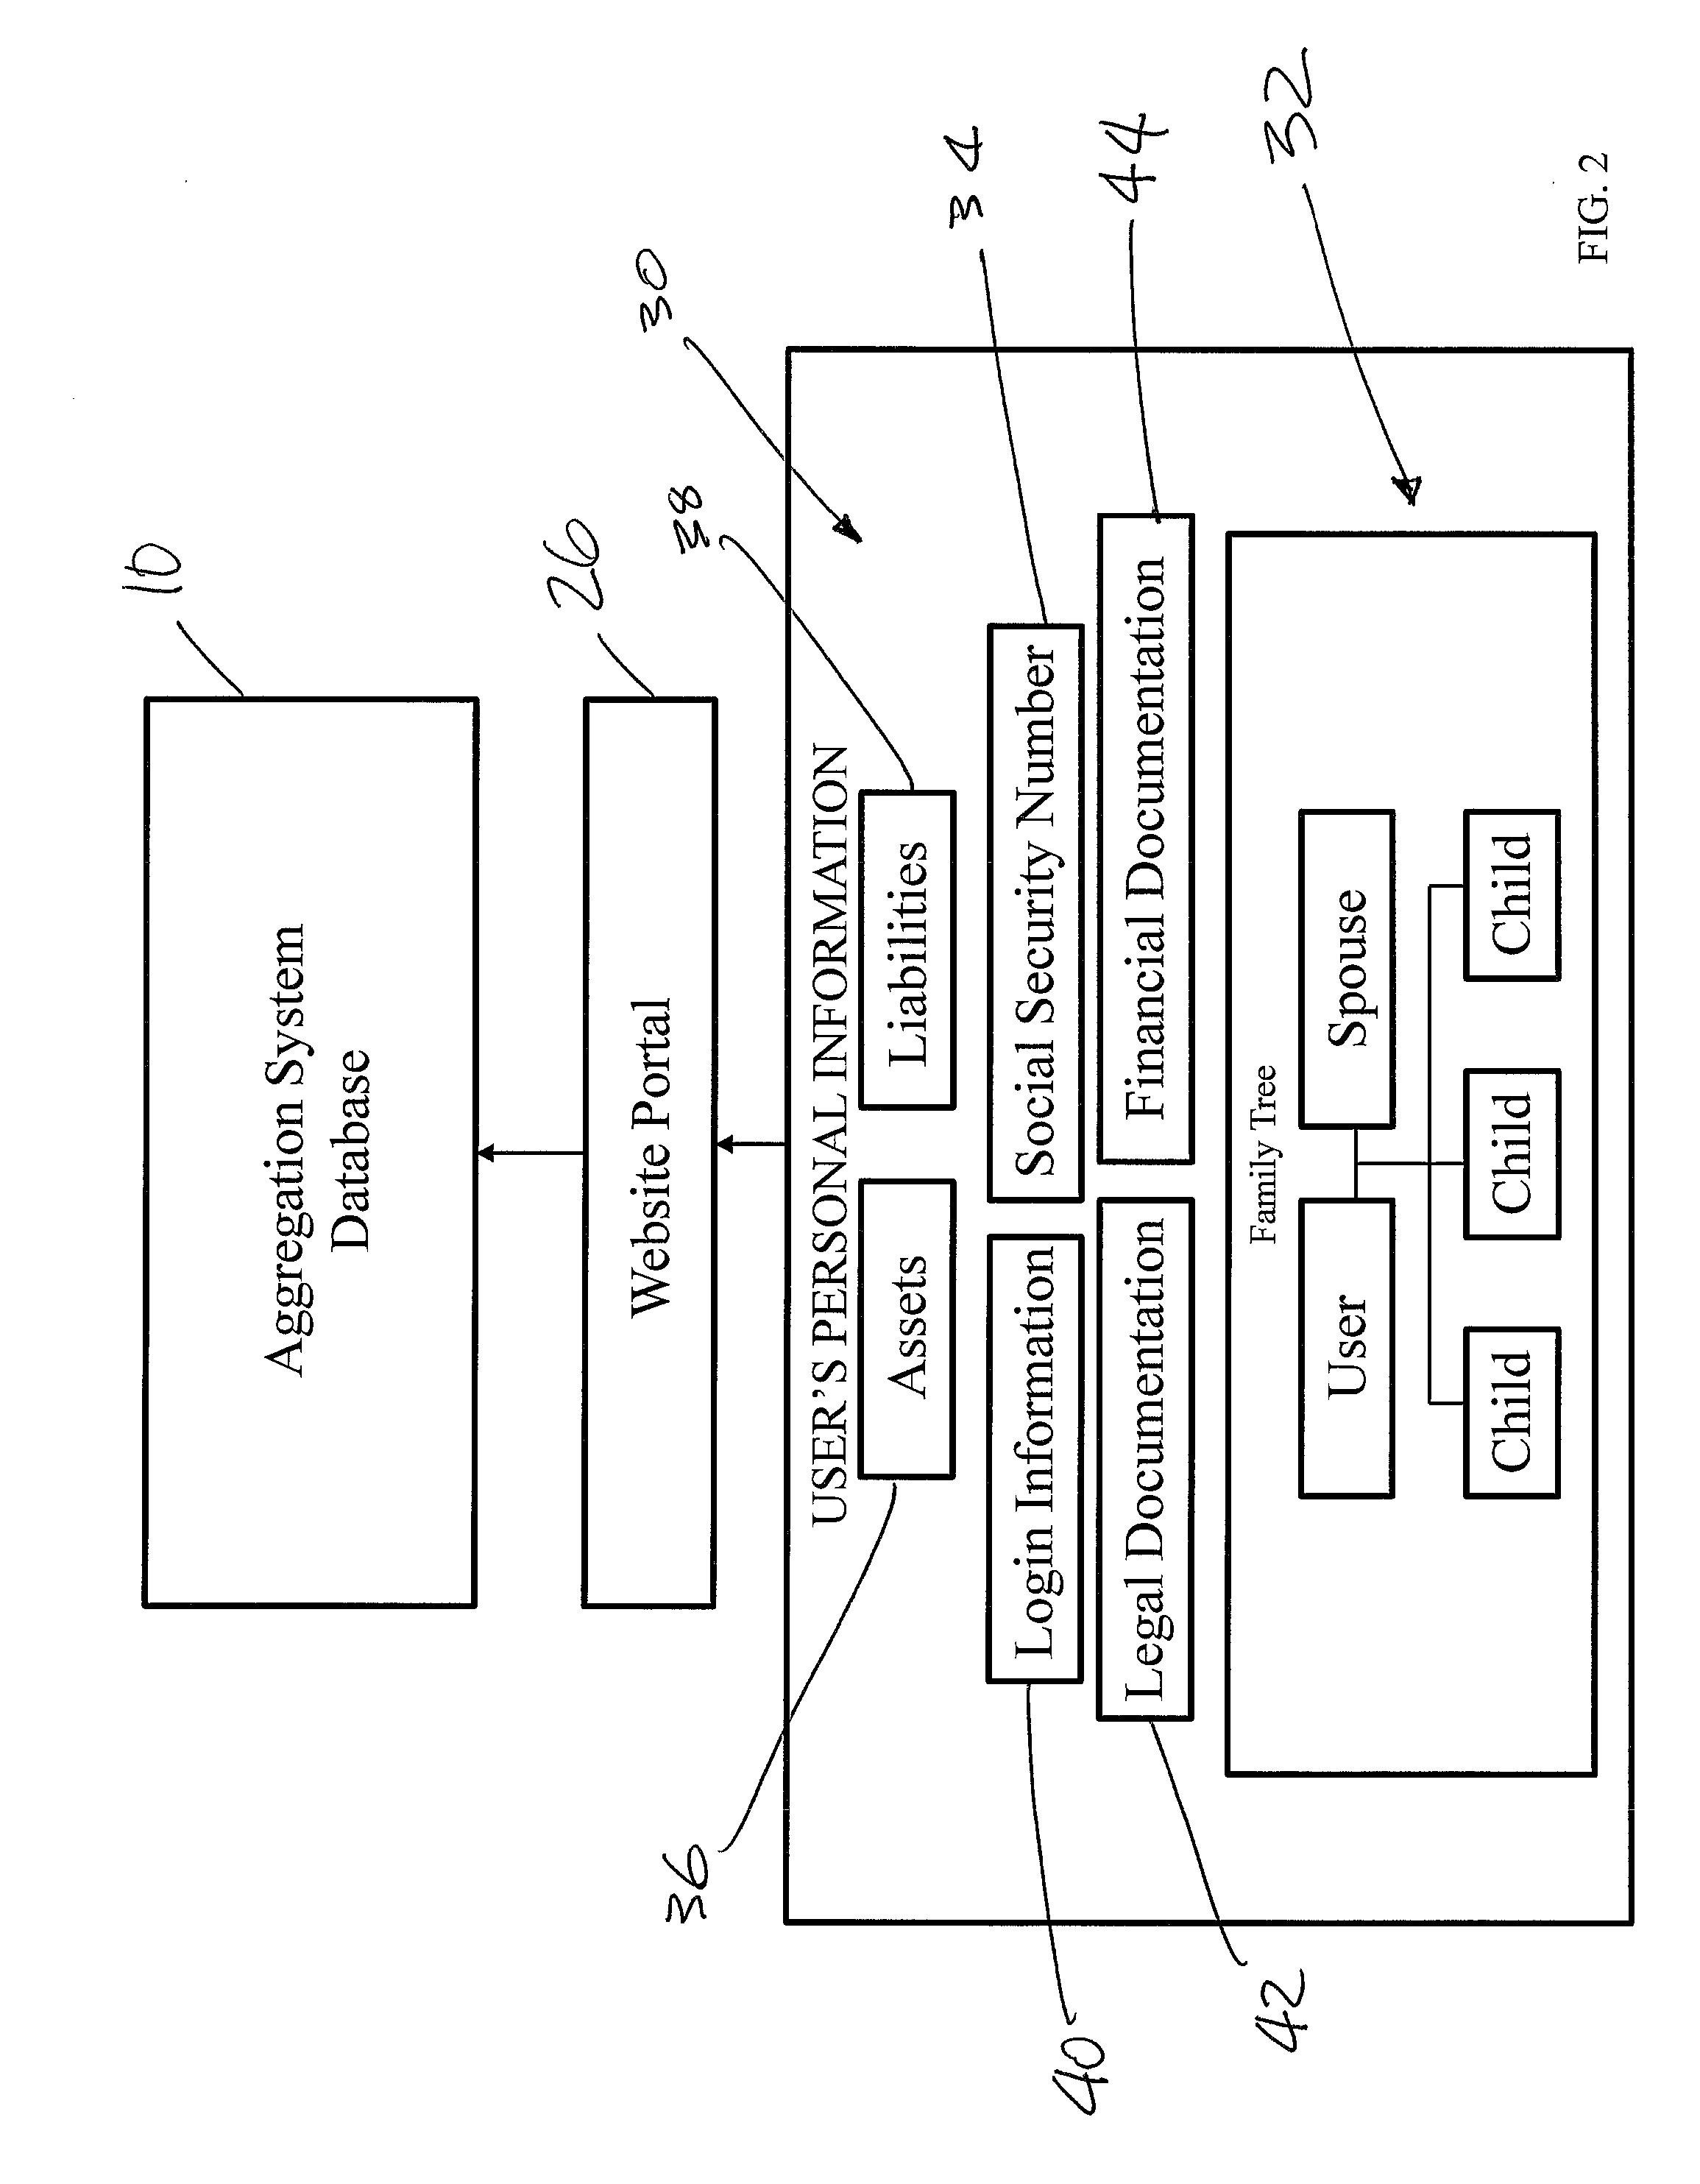 System and Method for Financial Notification